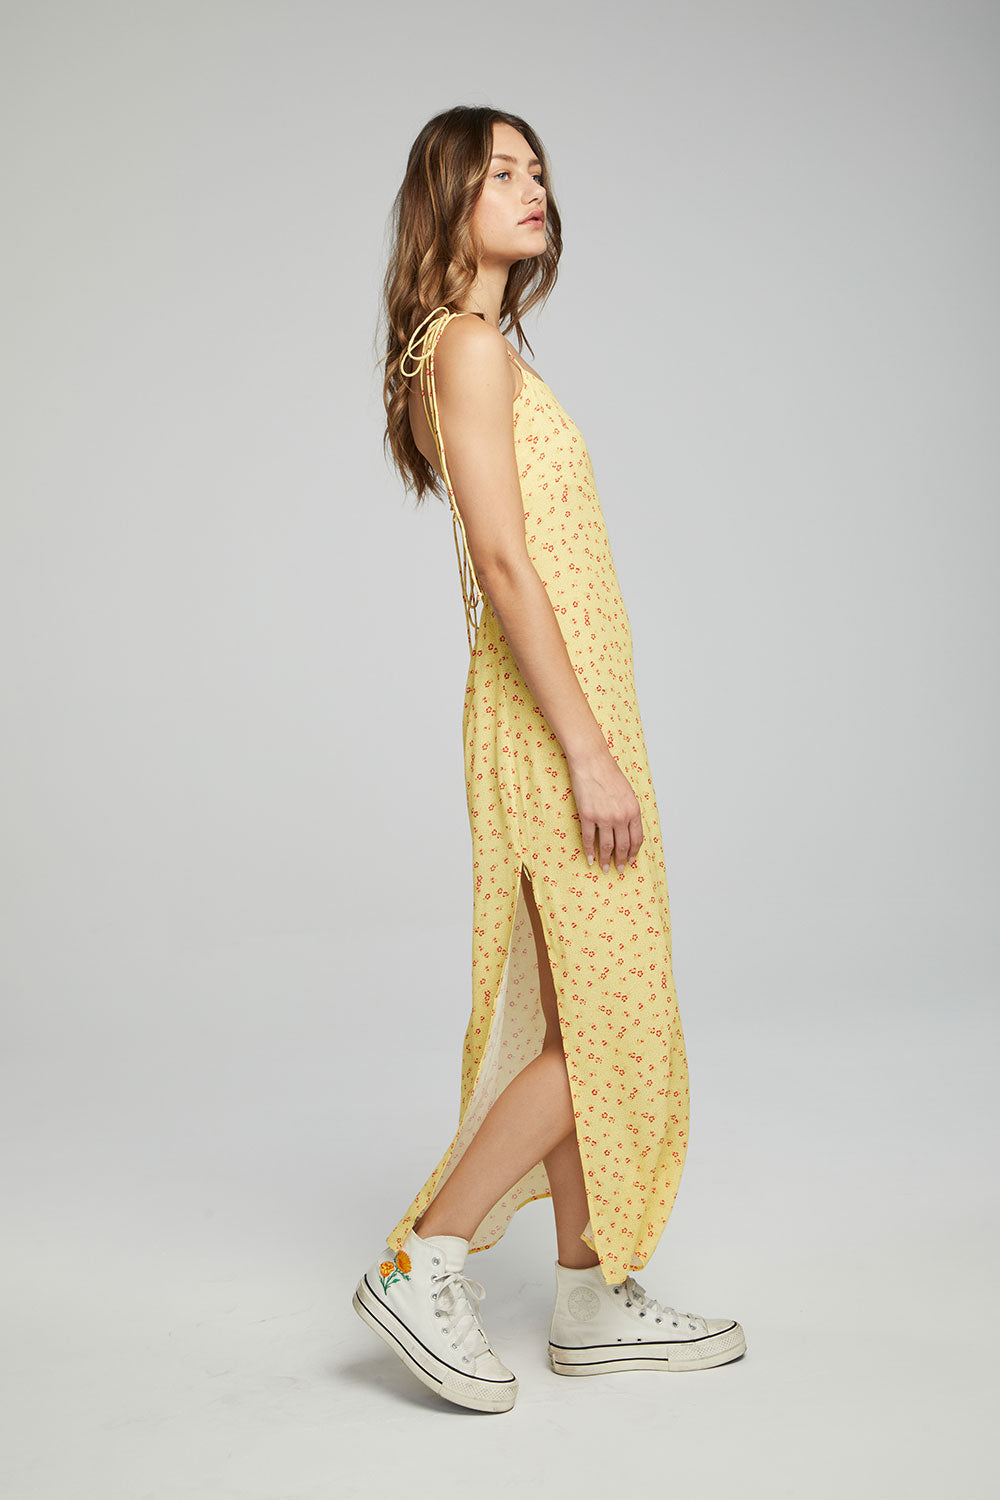 Palisades Maxi Dress - Anise Flower WOMENS chaserbrand